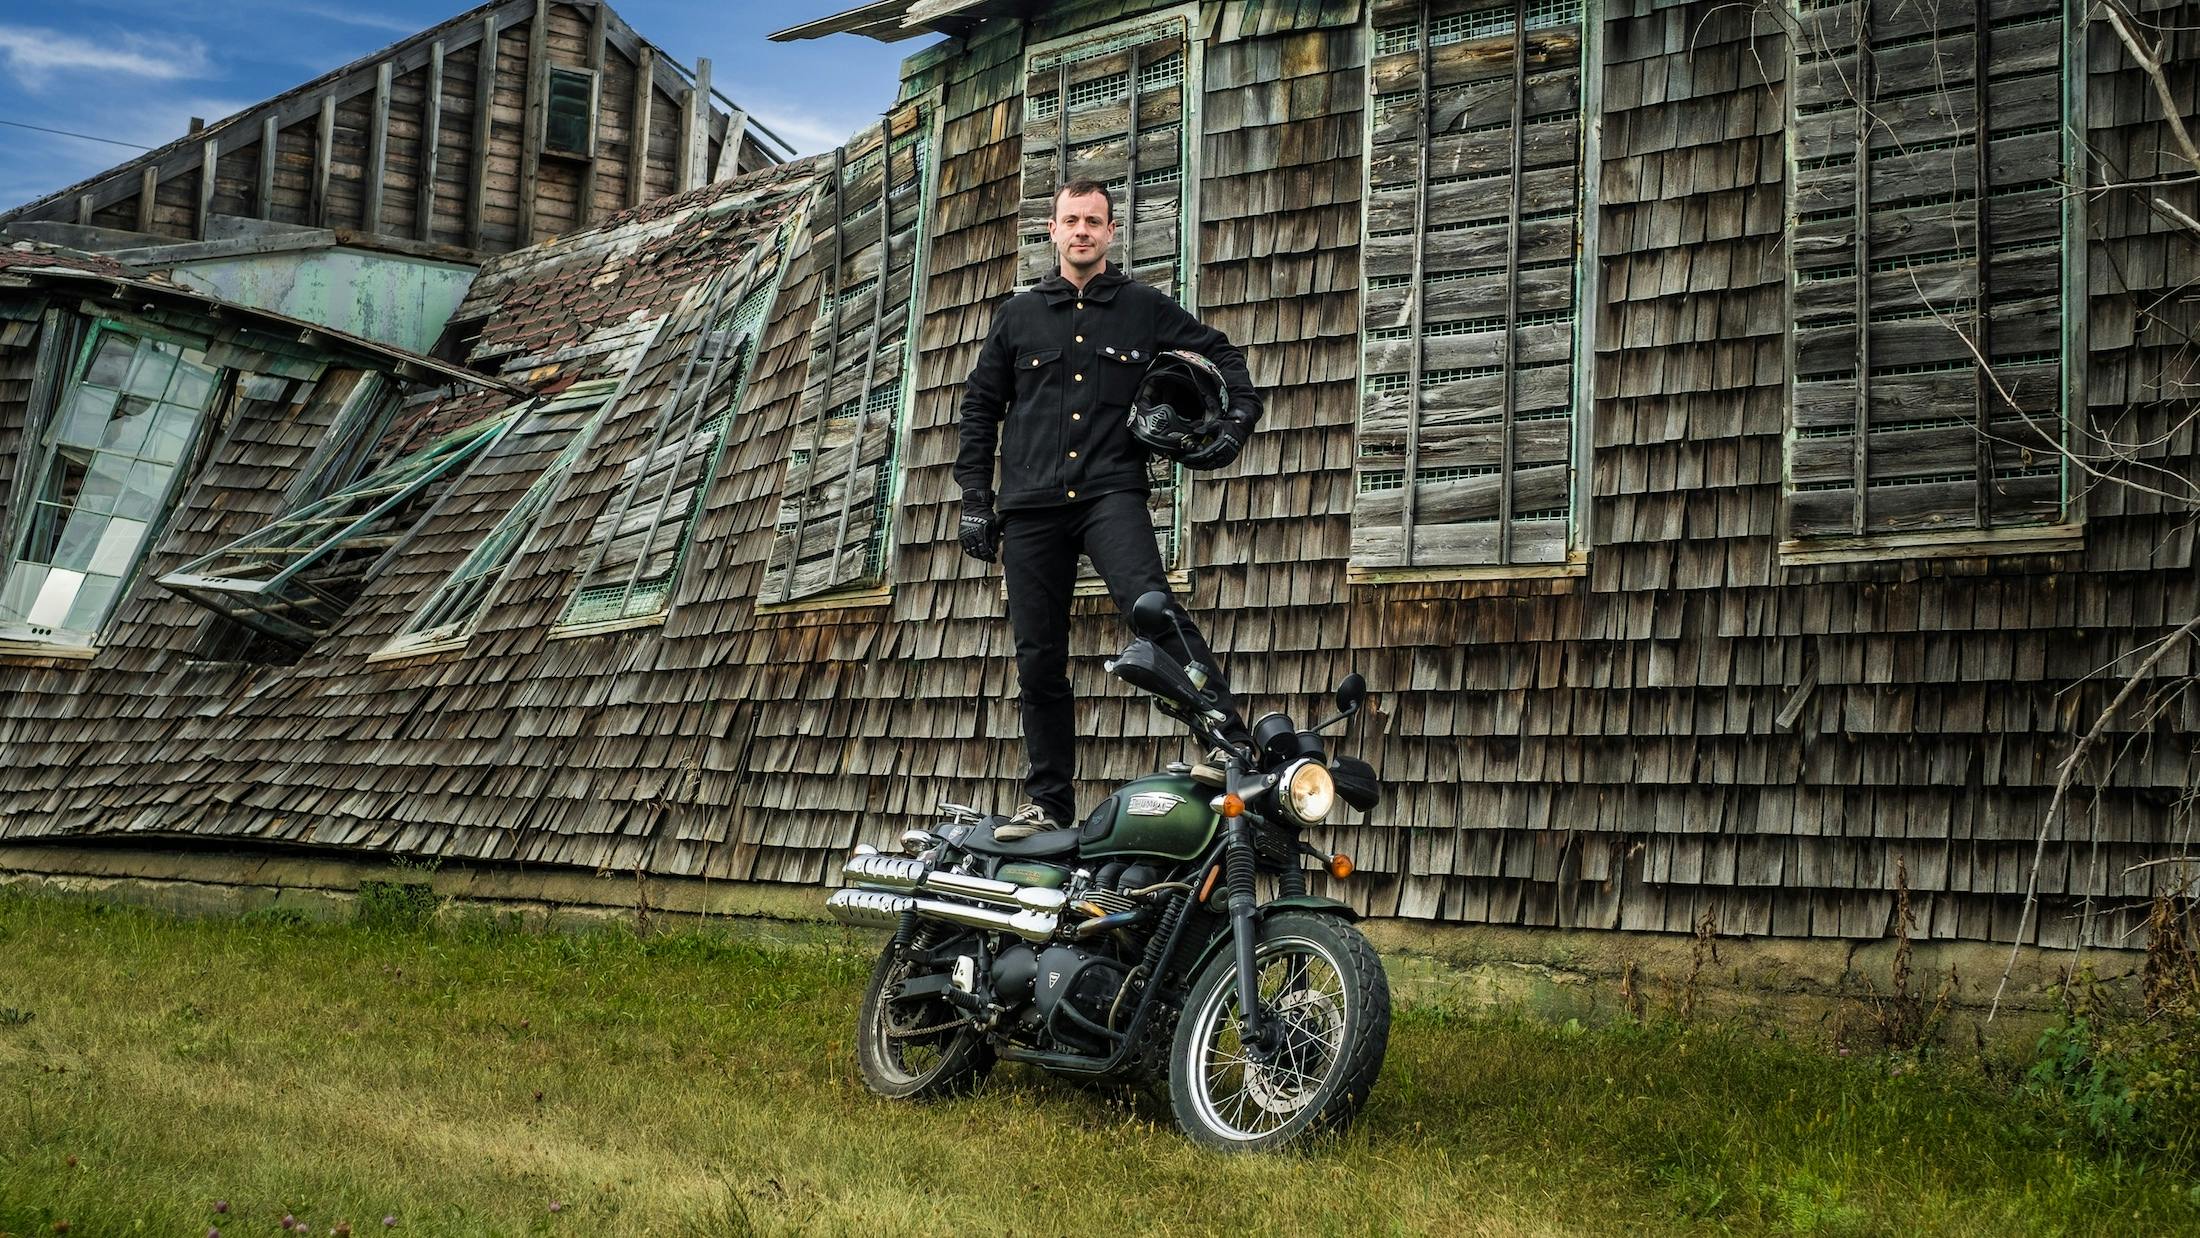 Roar Power: Cancer Bats' Liam Cormier On His Love Of Motorbikes